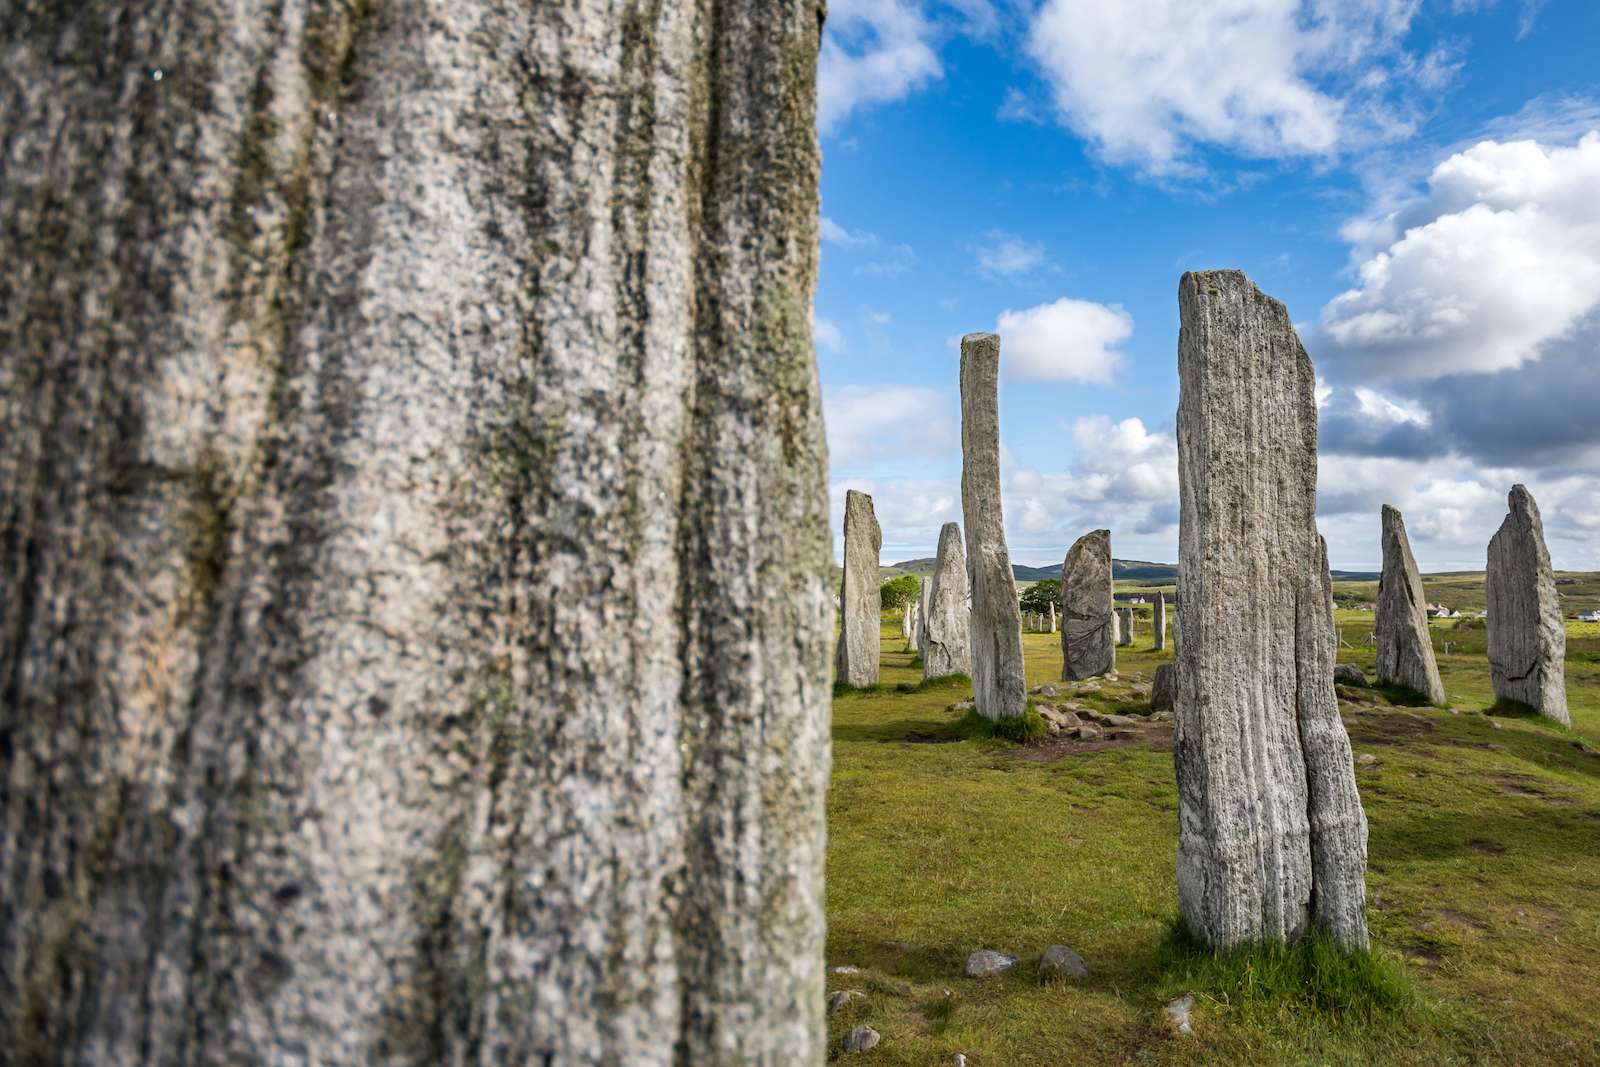 Callanish standing stones, with one blurred stone in the foreground. Isle od Lewis, Outer Hebrides, Scotland.